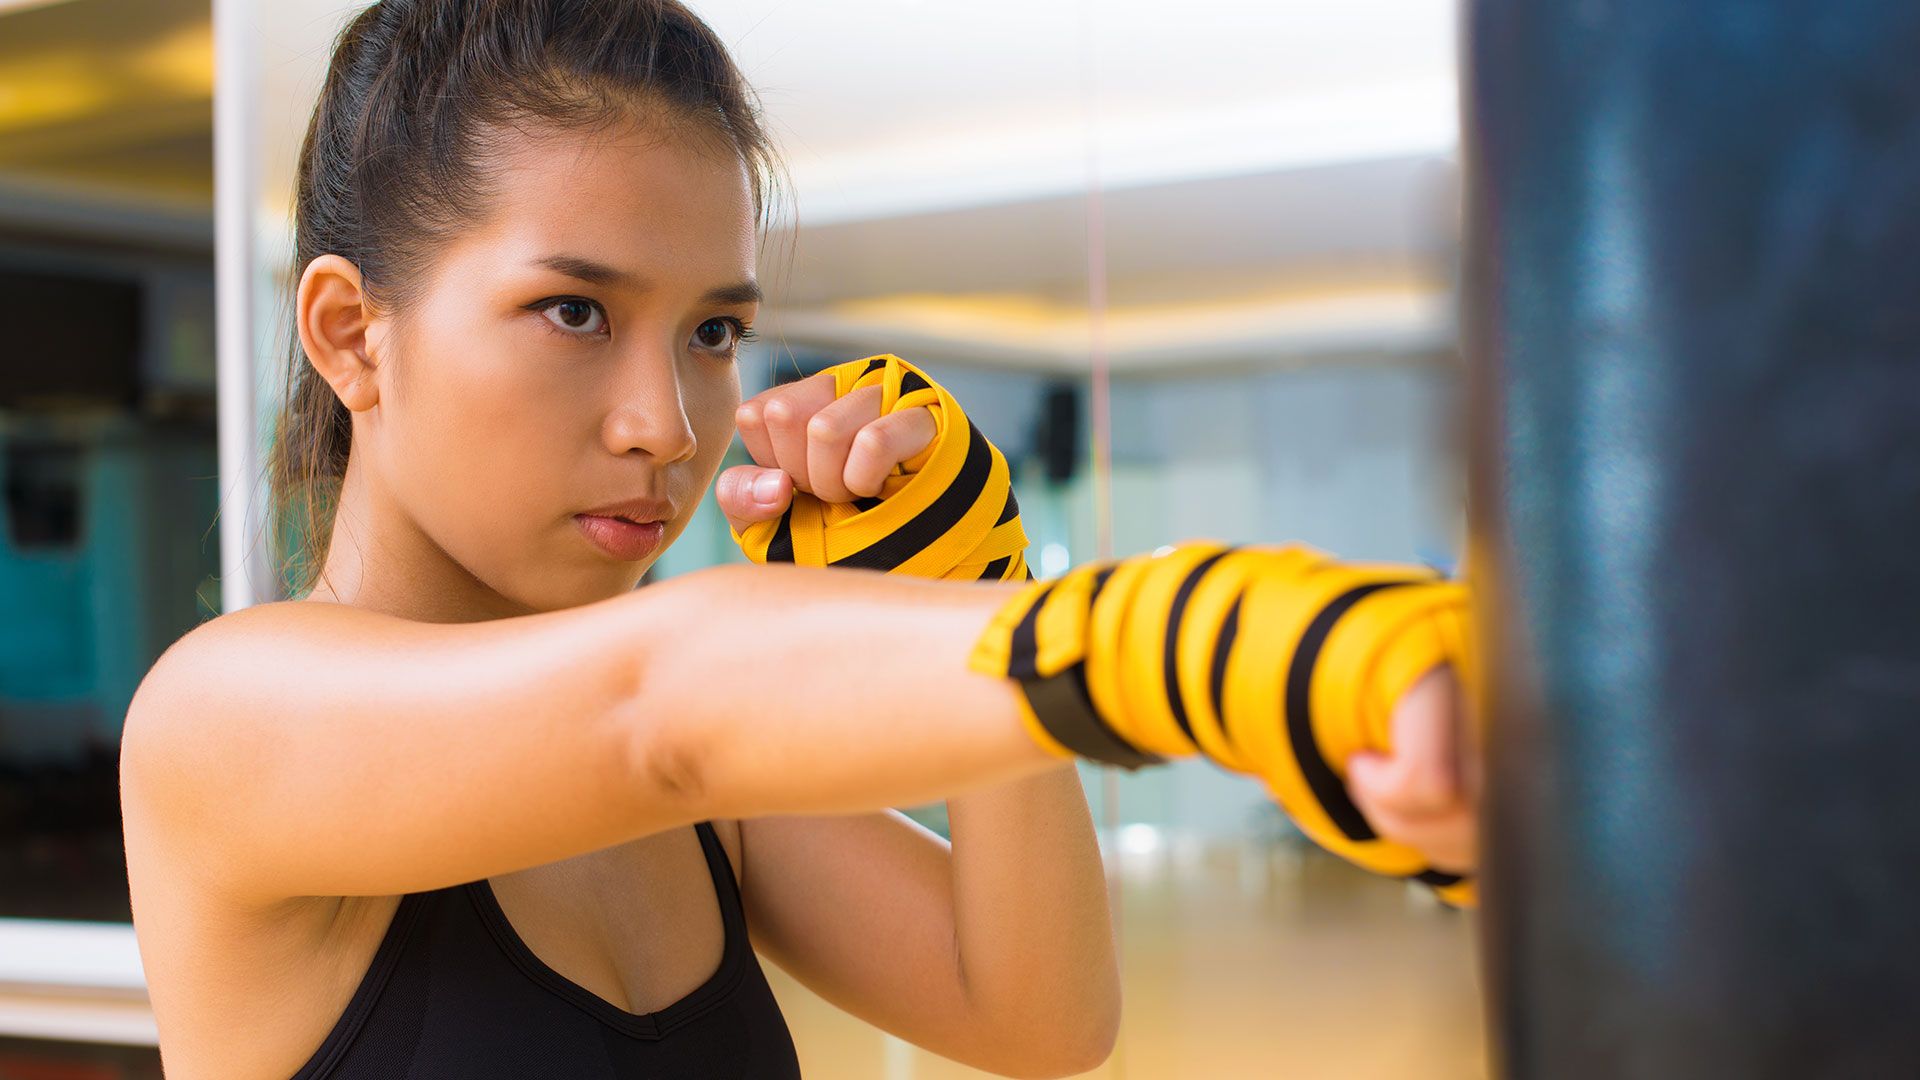 Women Who Dominated the Martial Arts World